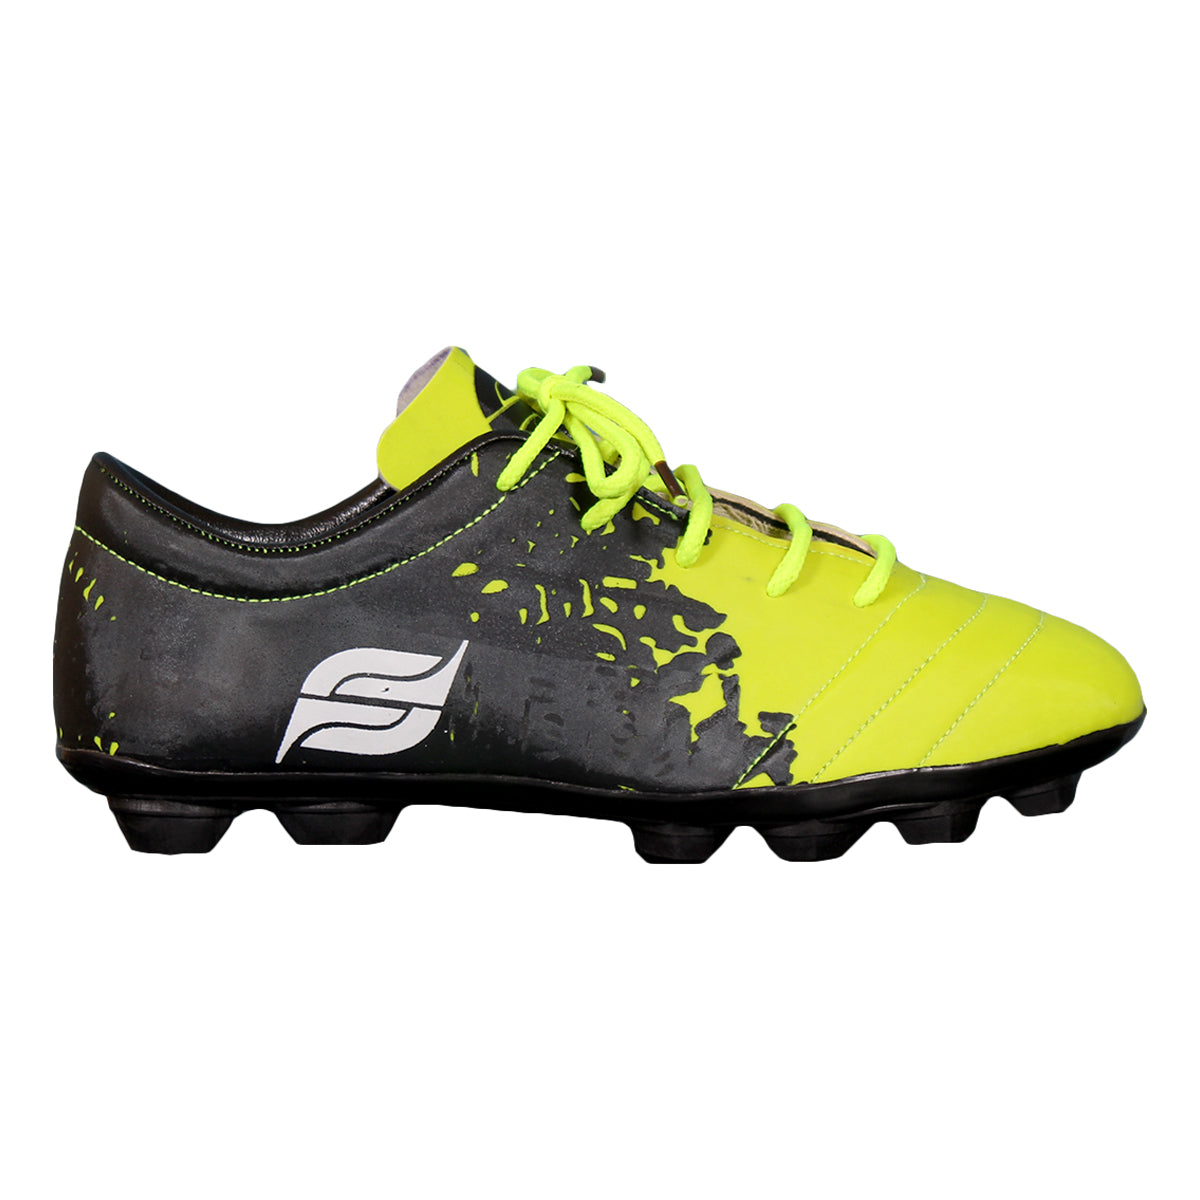 The ADI Lace Up Football Shoes For Synthetic Turf & Hard Ground | Football Studs Available in Multiple Sizes & Colours, Pair of 1